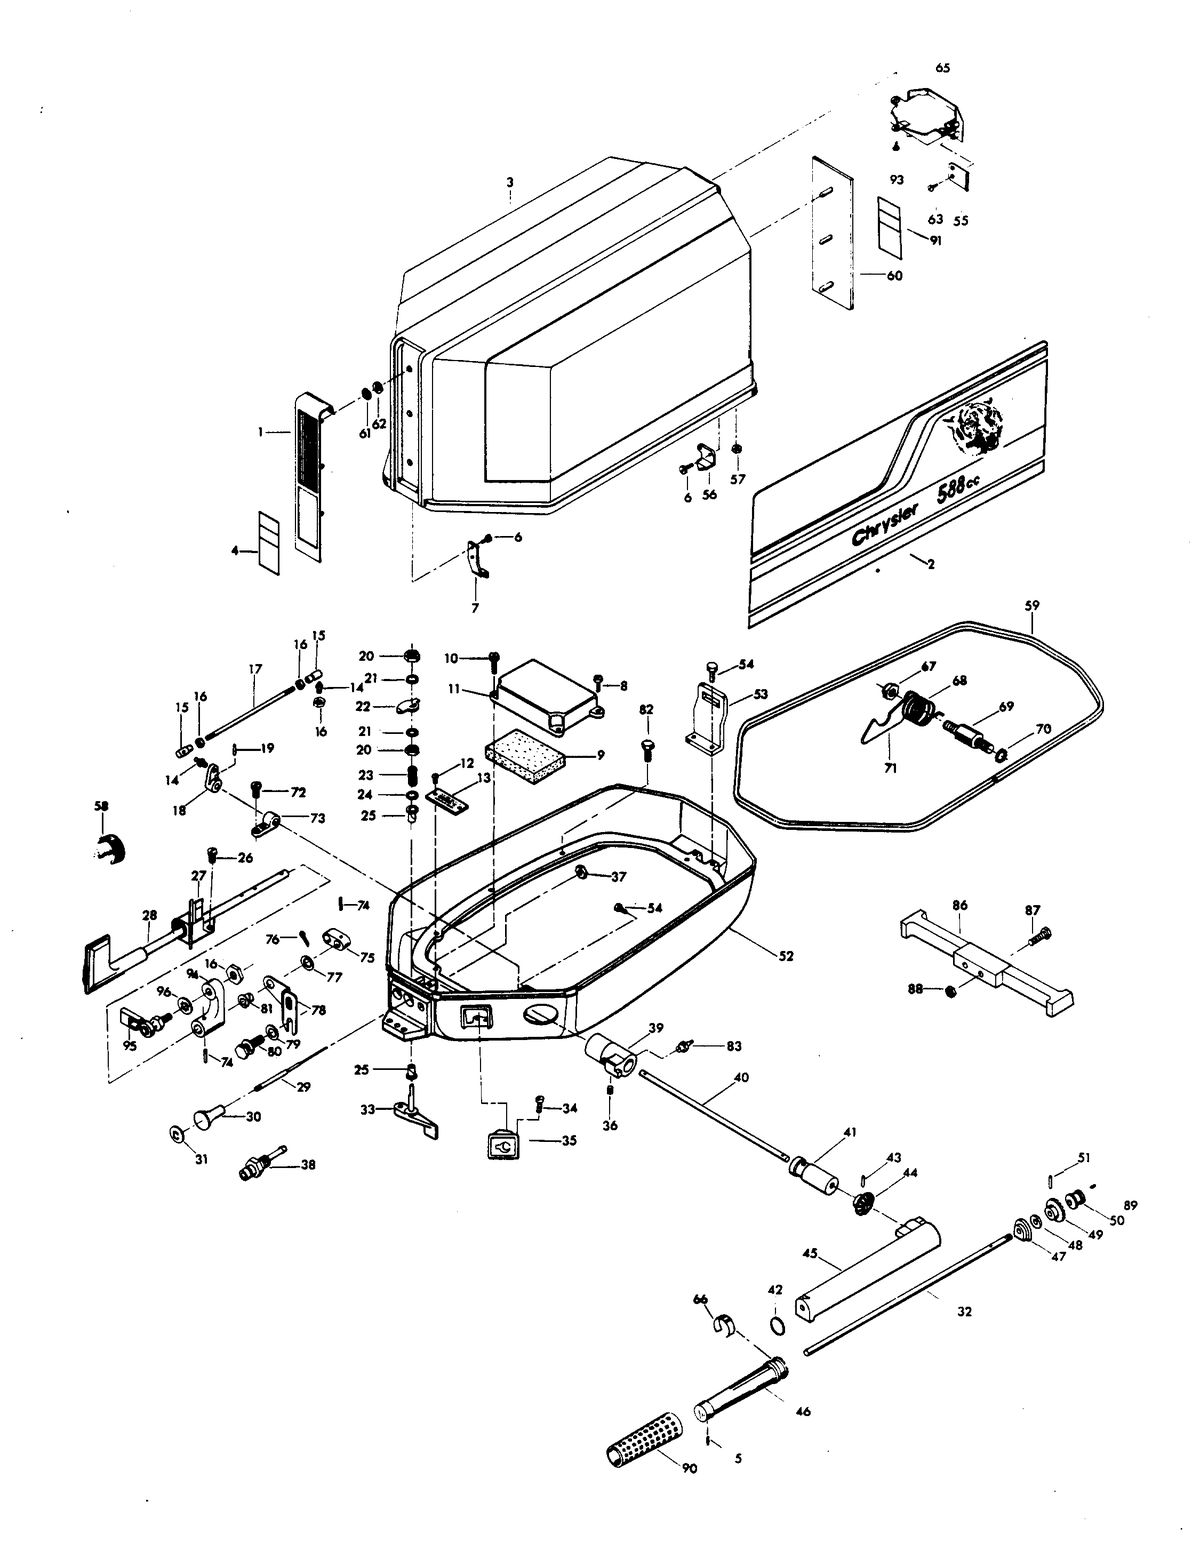 CHRYSLER 35 H.P. ENGINE COVER AND SUPPORT PLATE